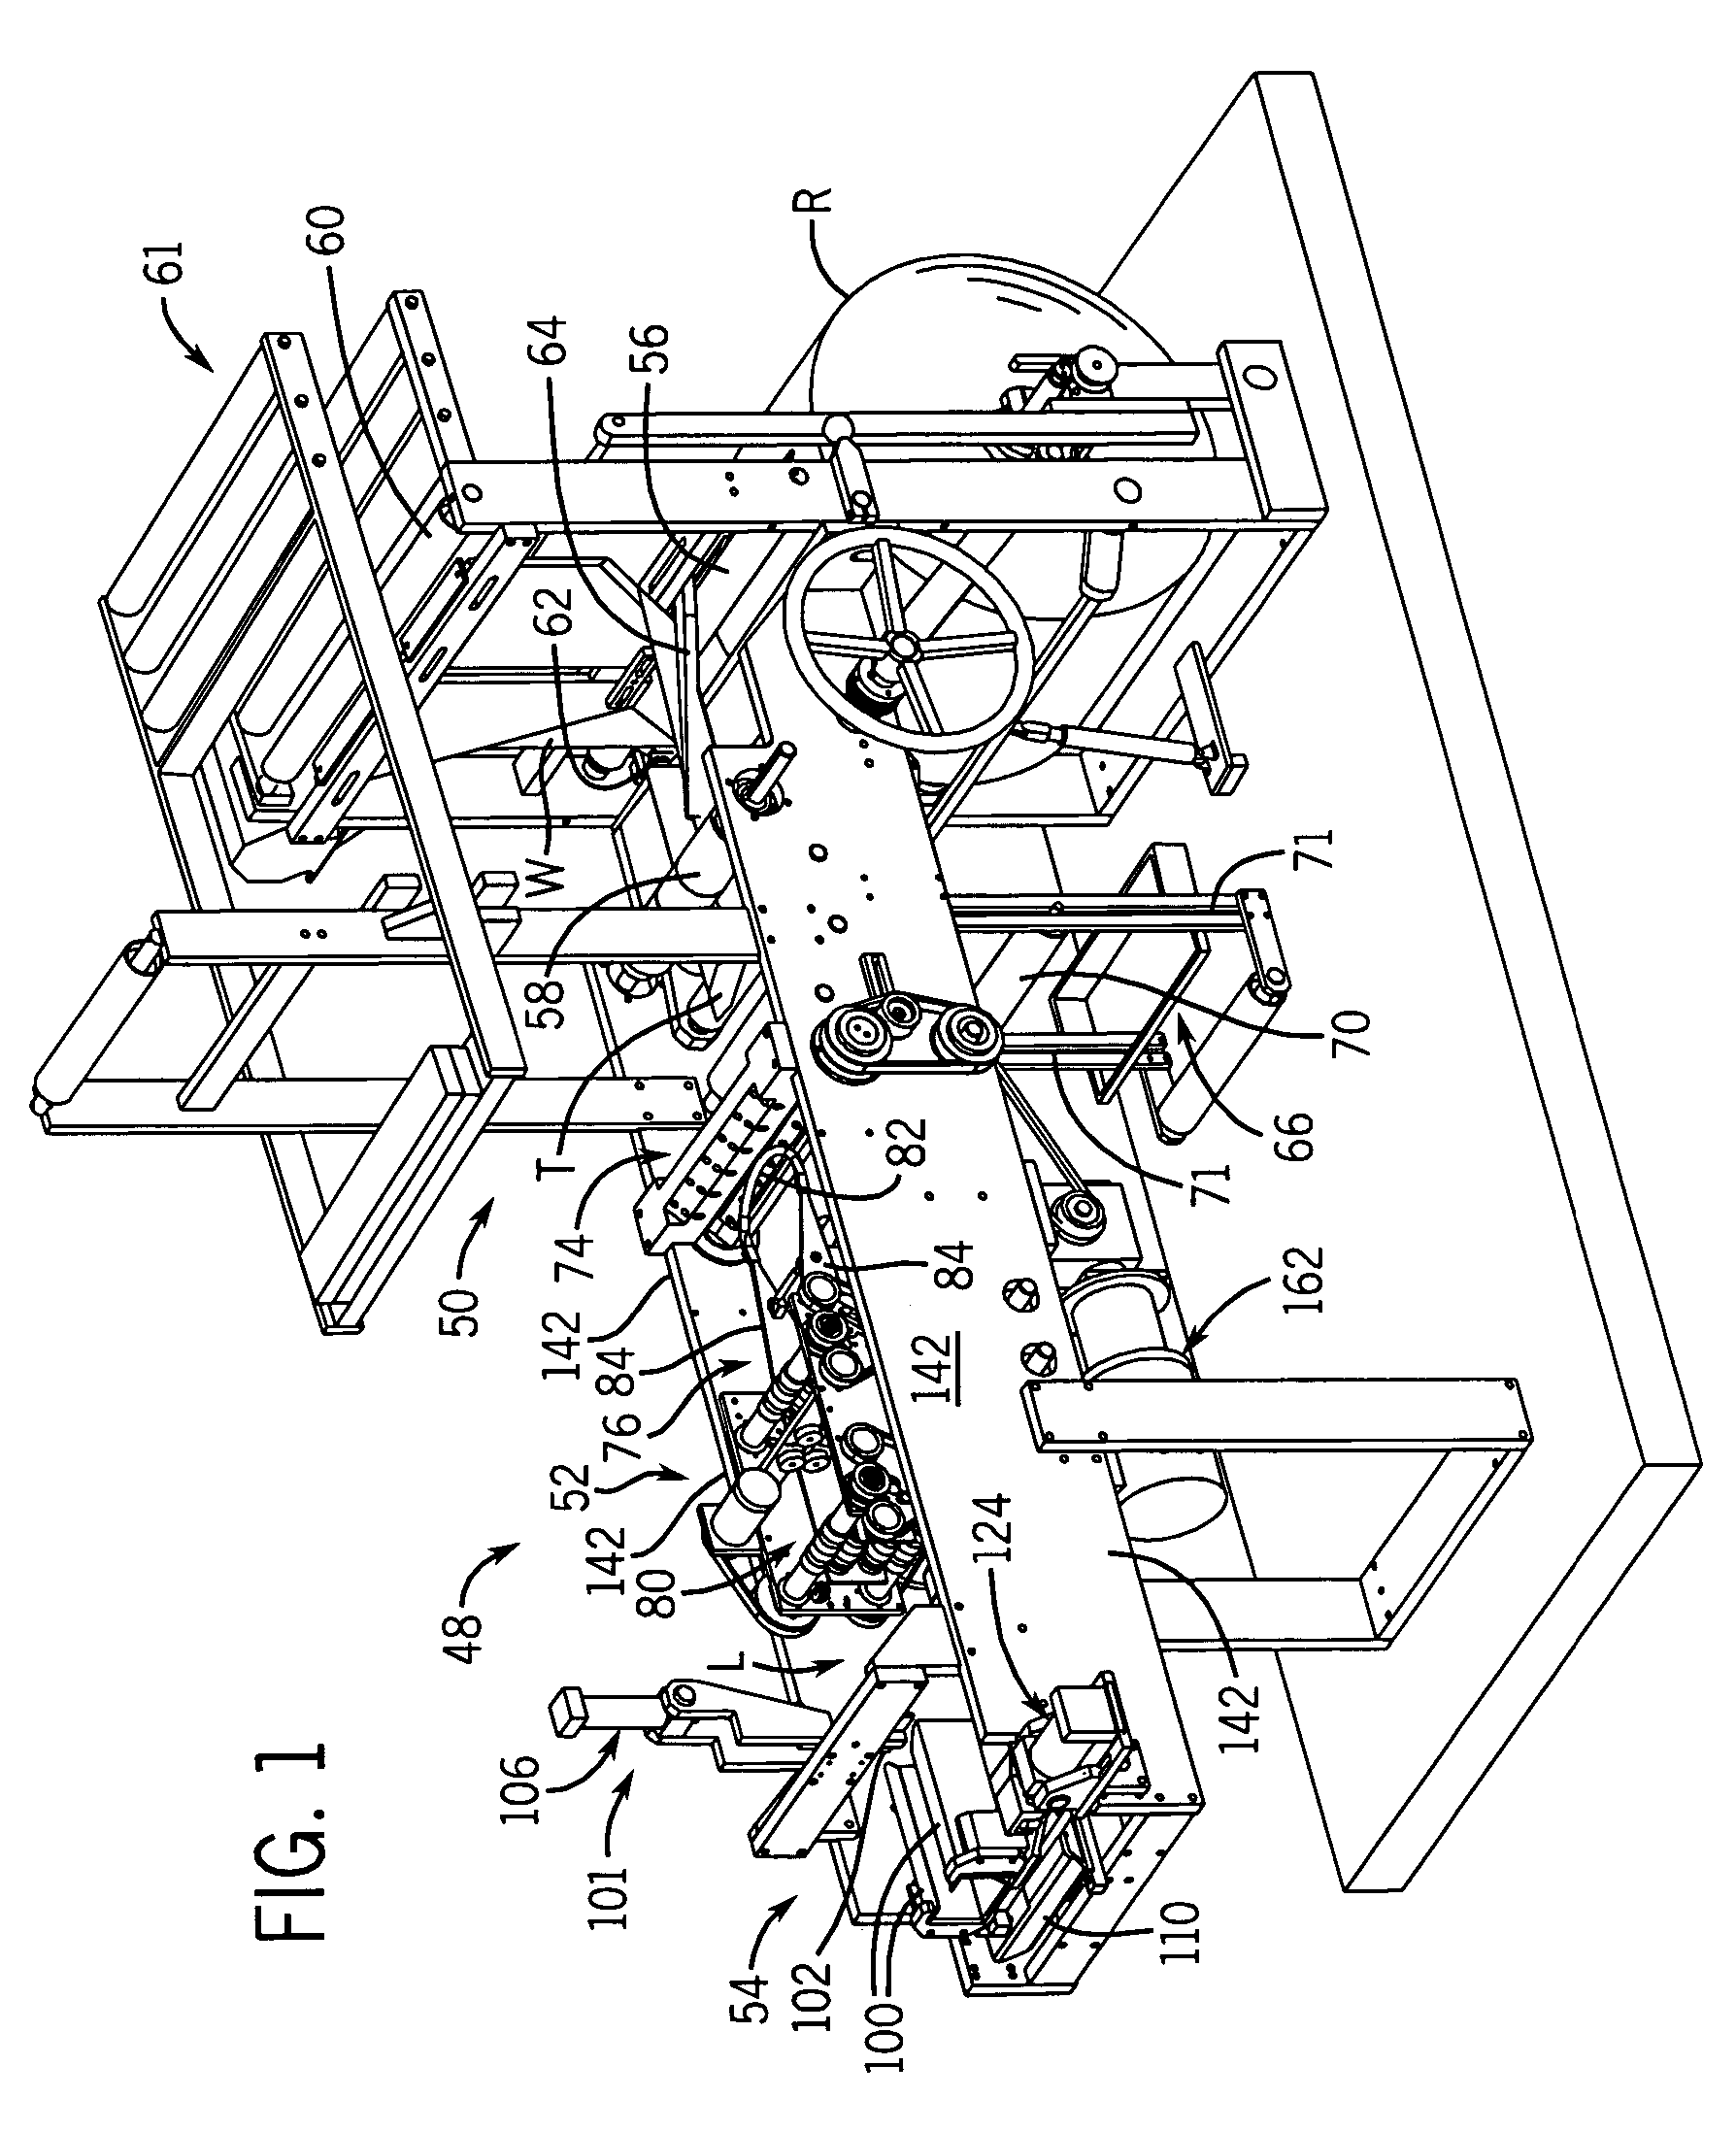 Method and apparatus for sleeve or band-type packaging of a compressible article